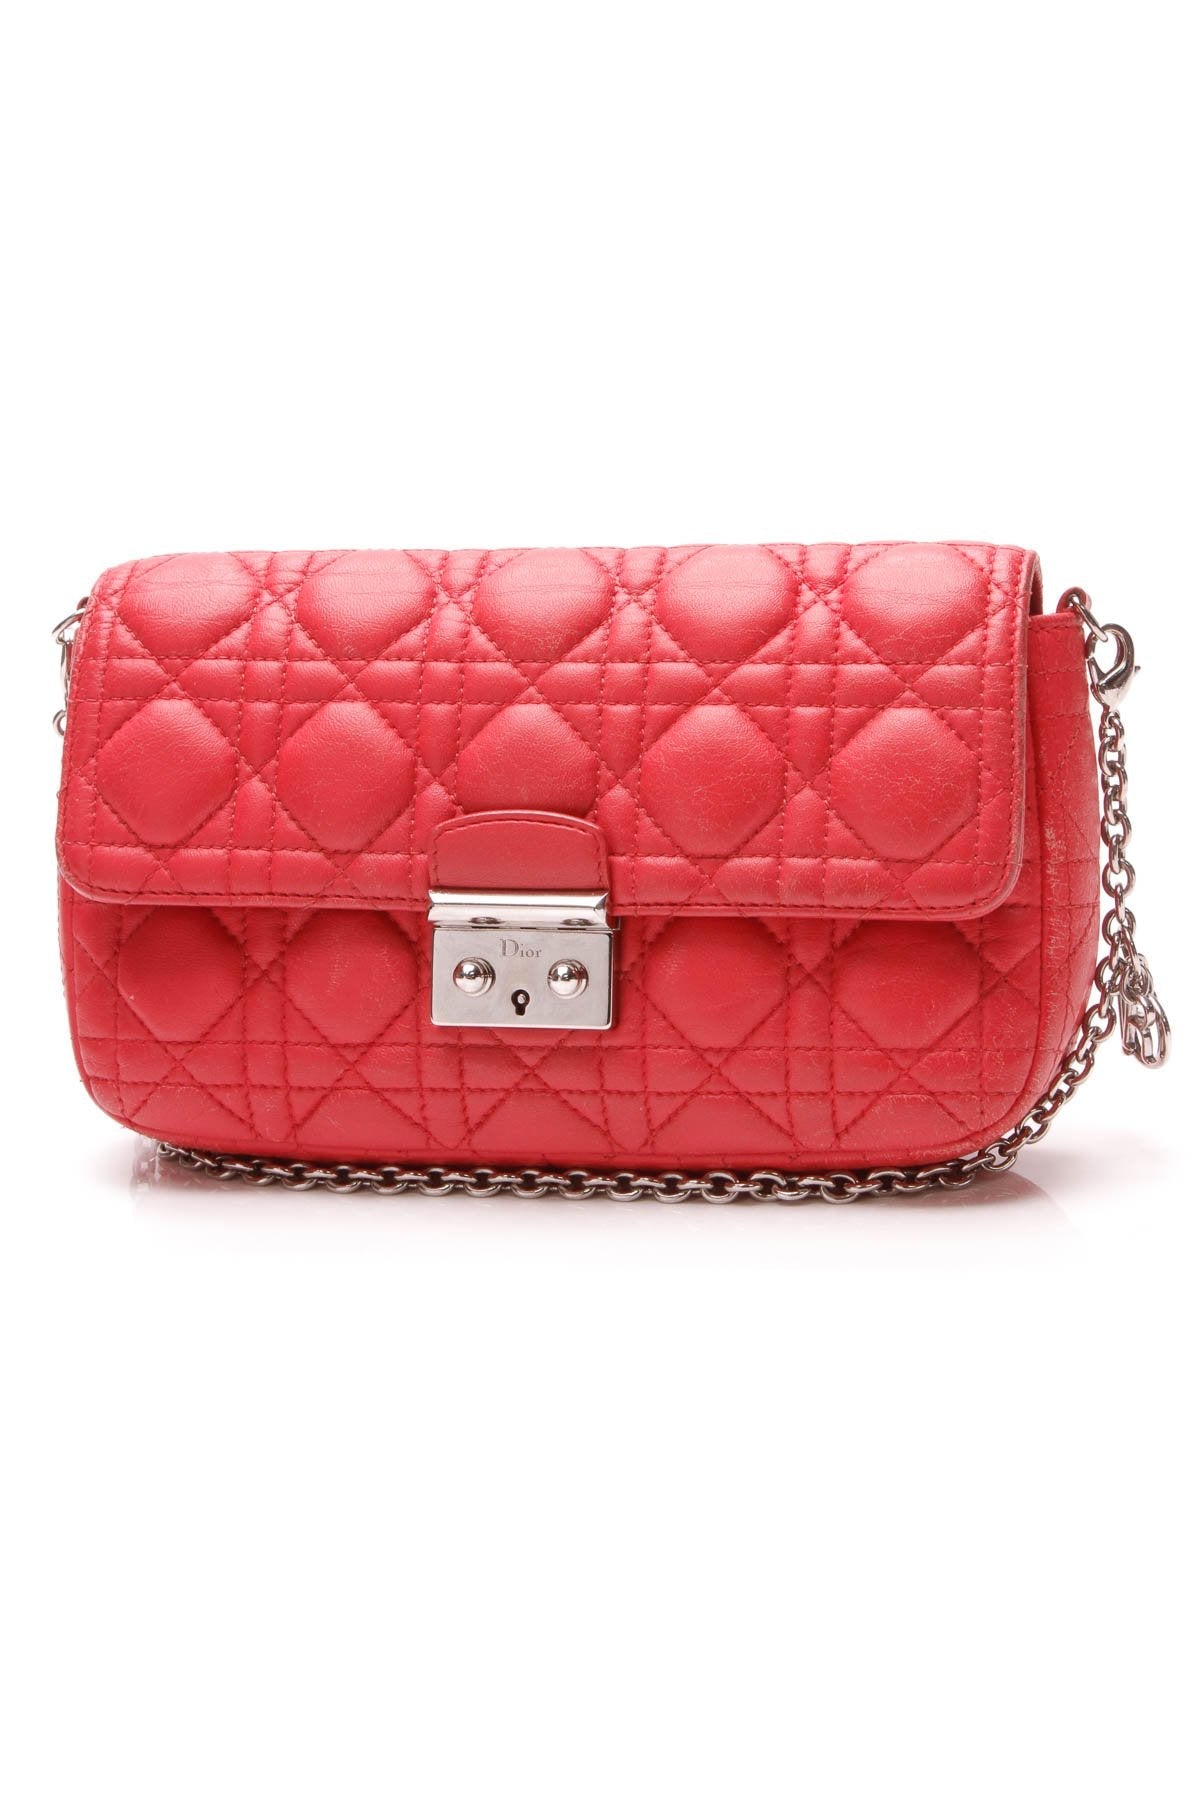 Miss Dior Cannage Small Flap Bag - Red